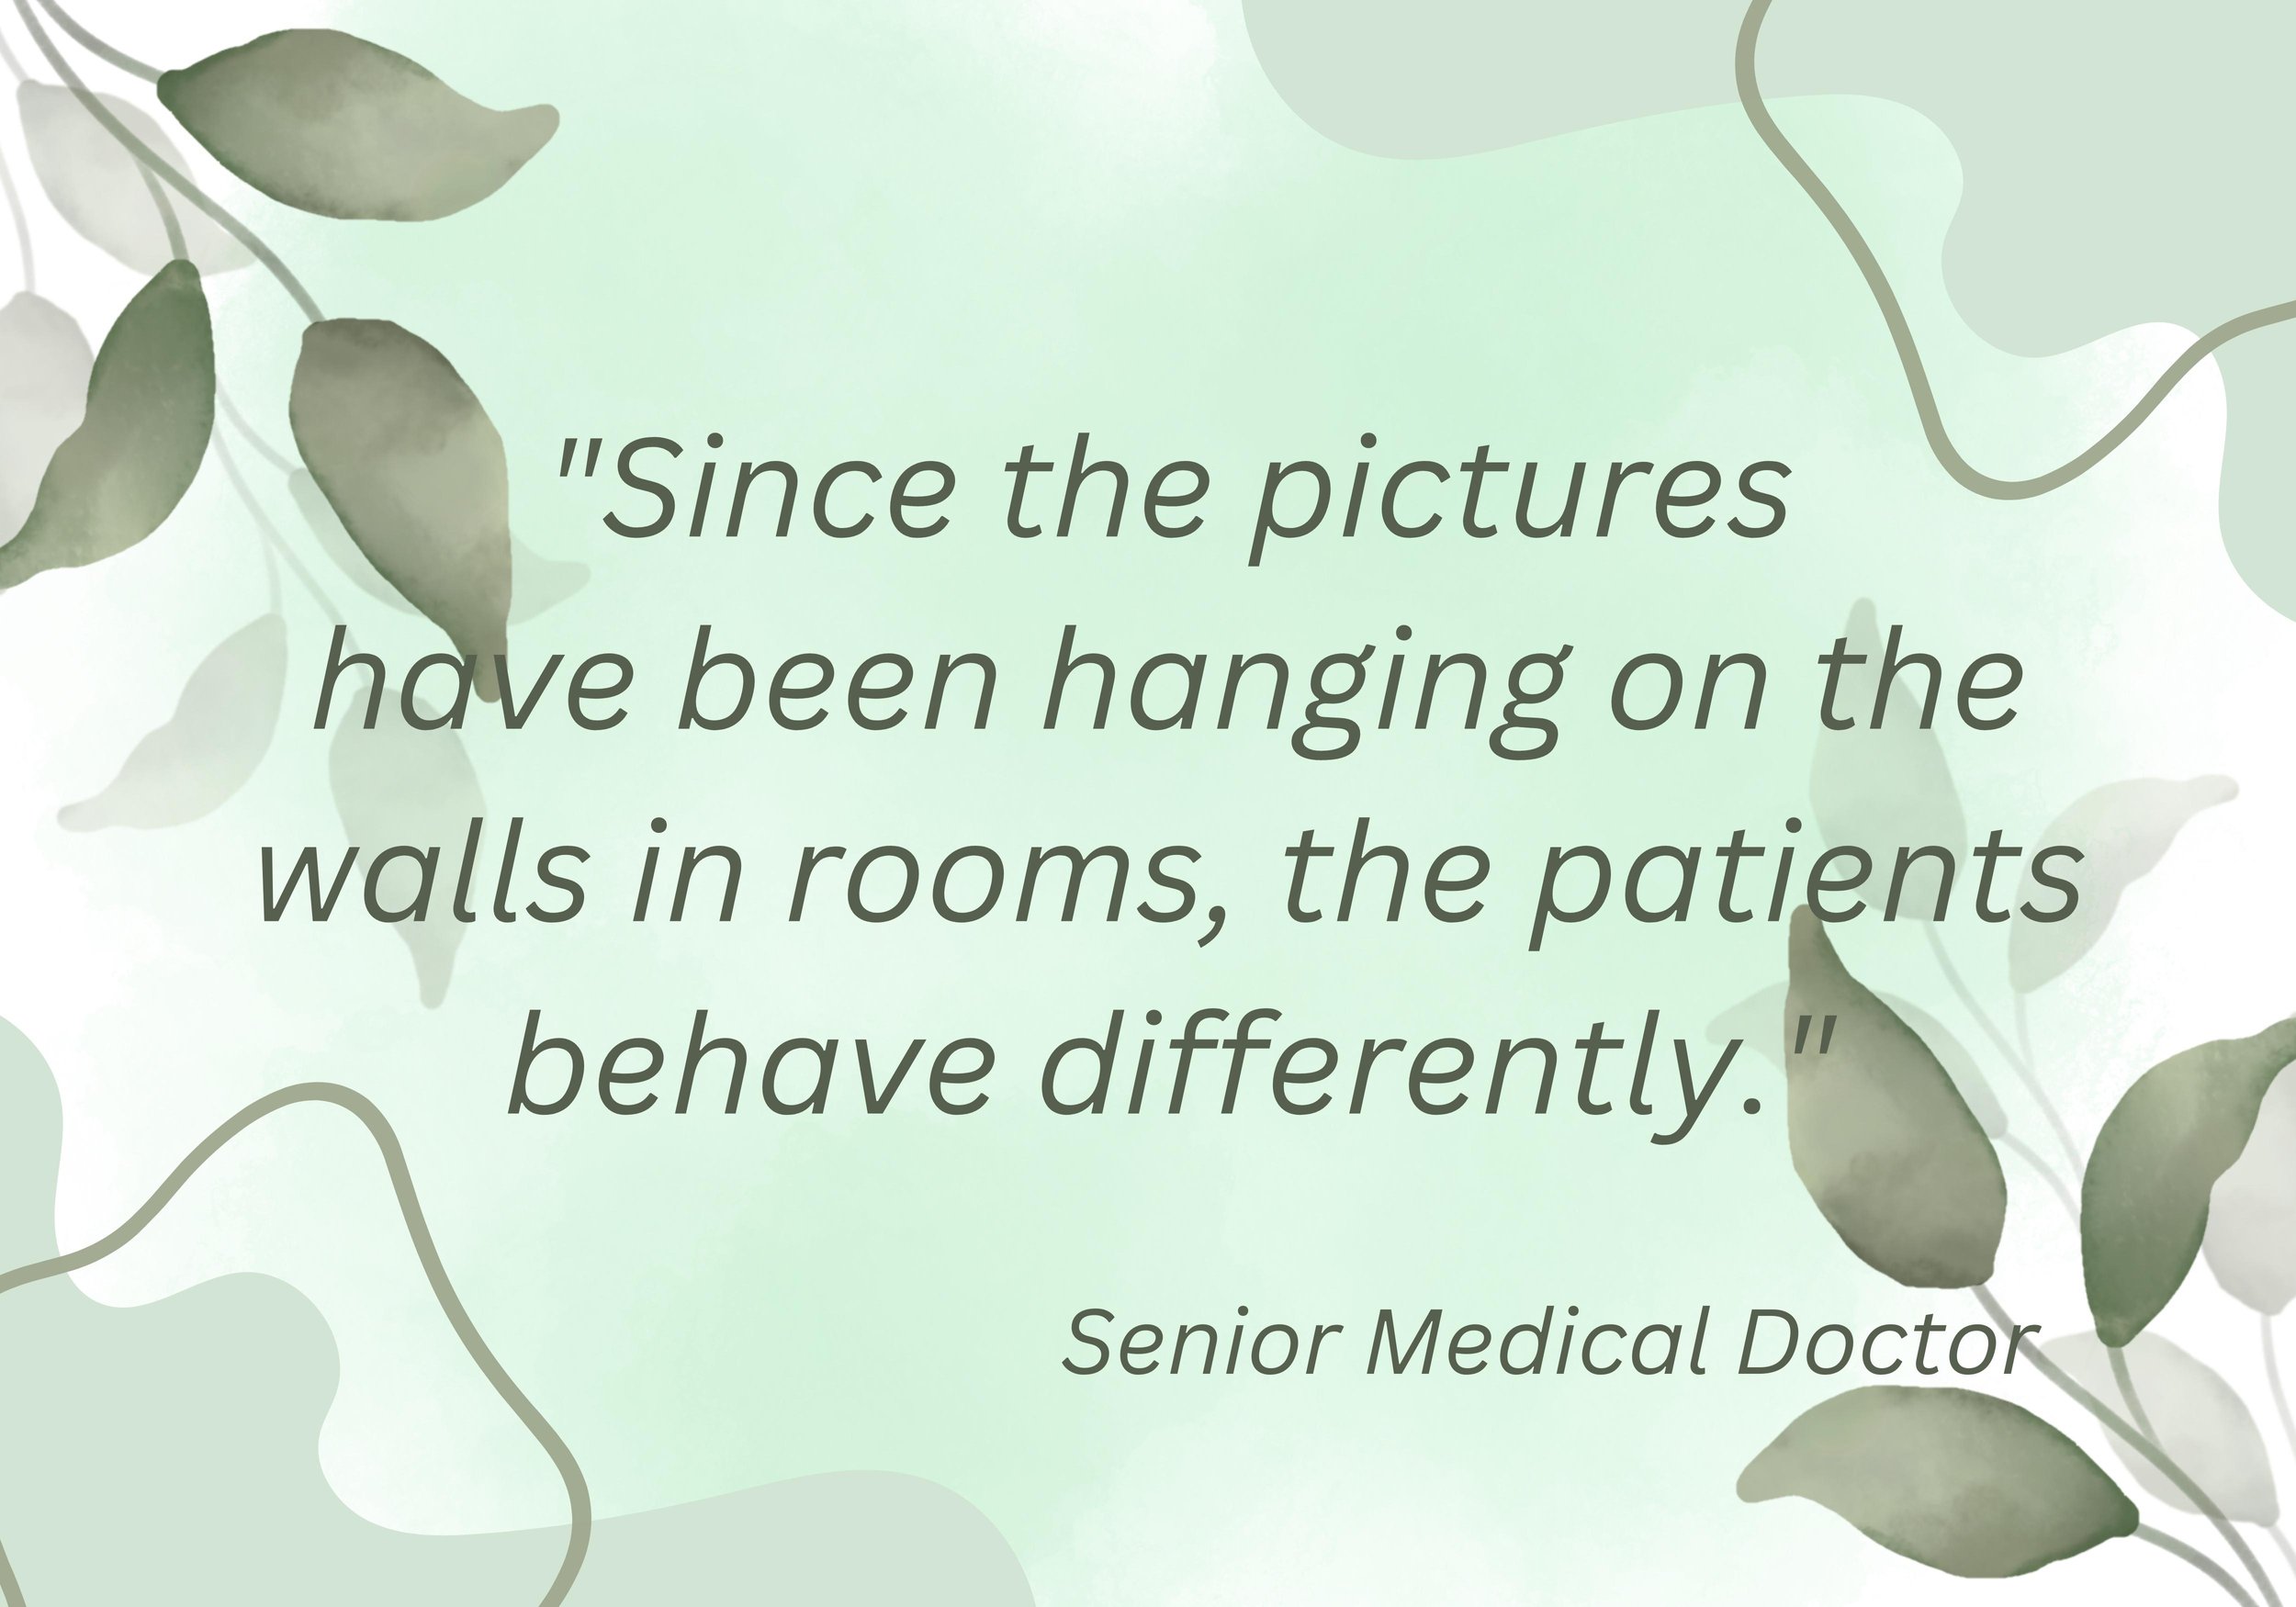 Since the pictures have been hanging in the room, the patients behave differently. (senior physician)-2.jpg